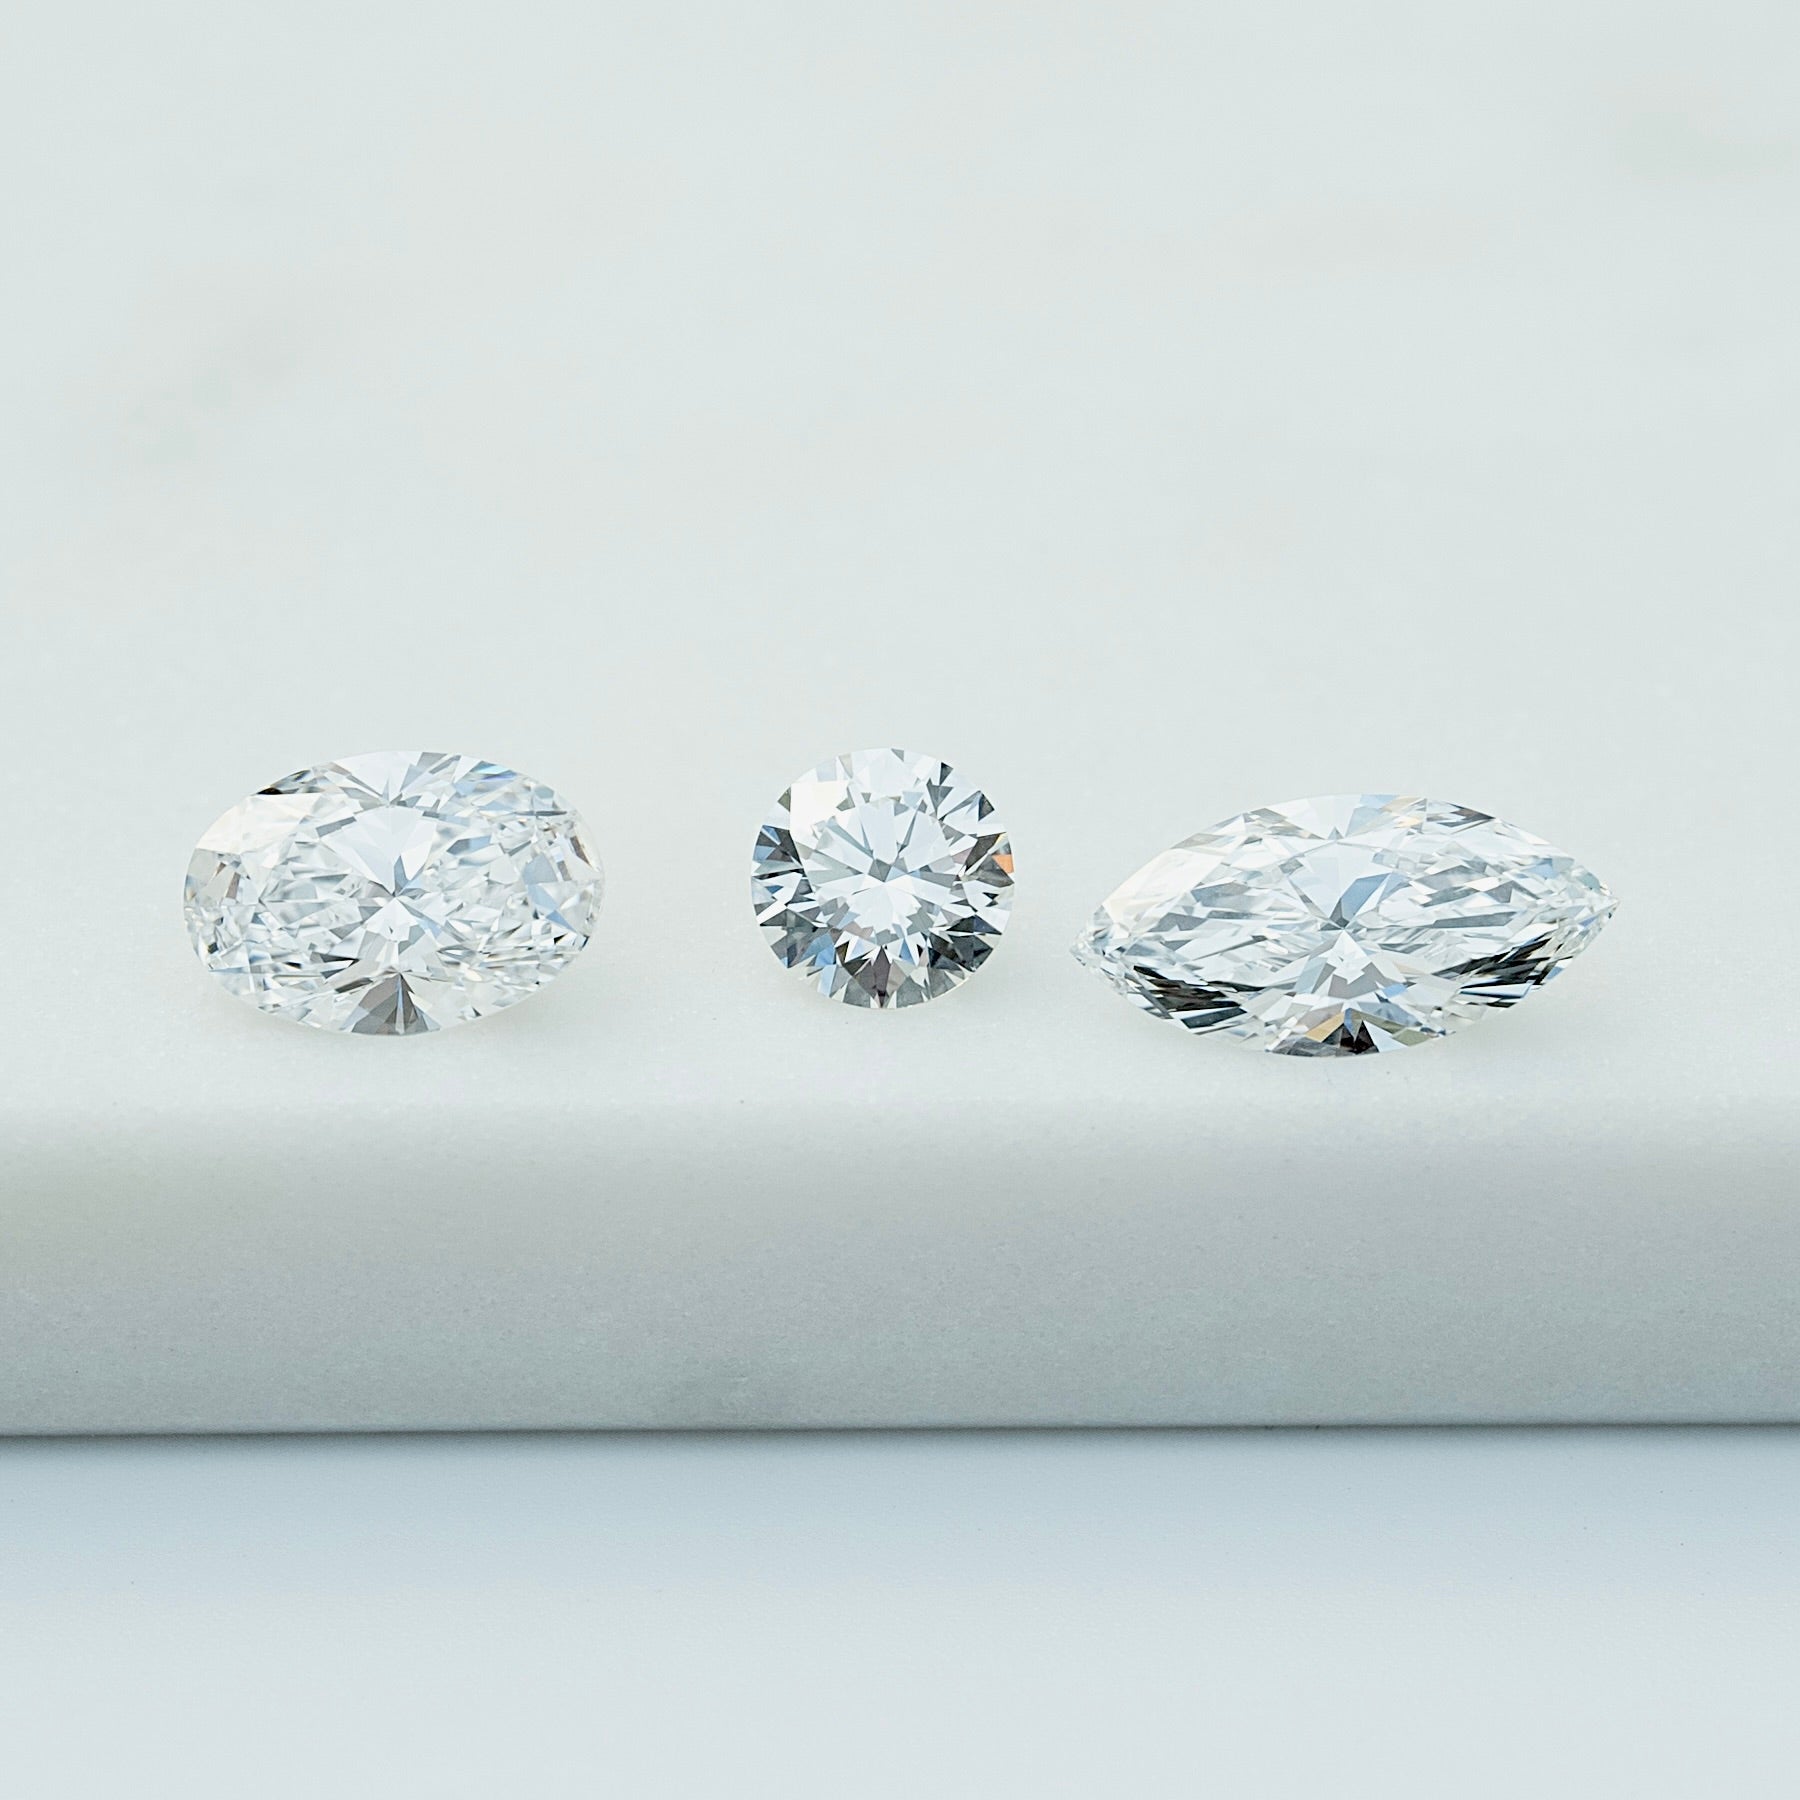 Marquise vs. Oval vs. Round Diamonds - Which One Sparkles More?